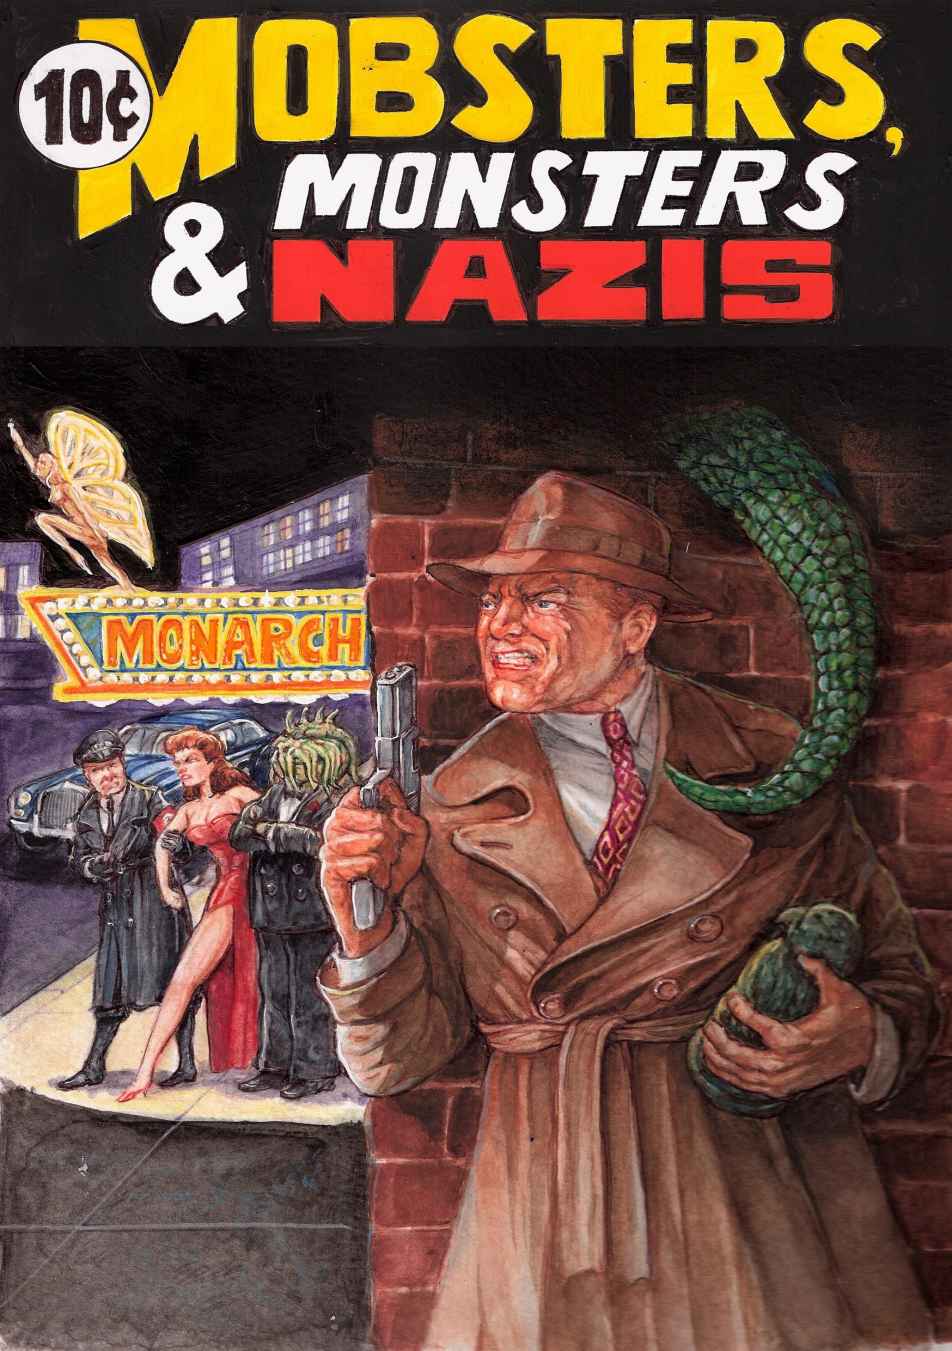 Mobsters, Monsters & Nazis